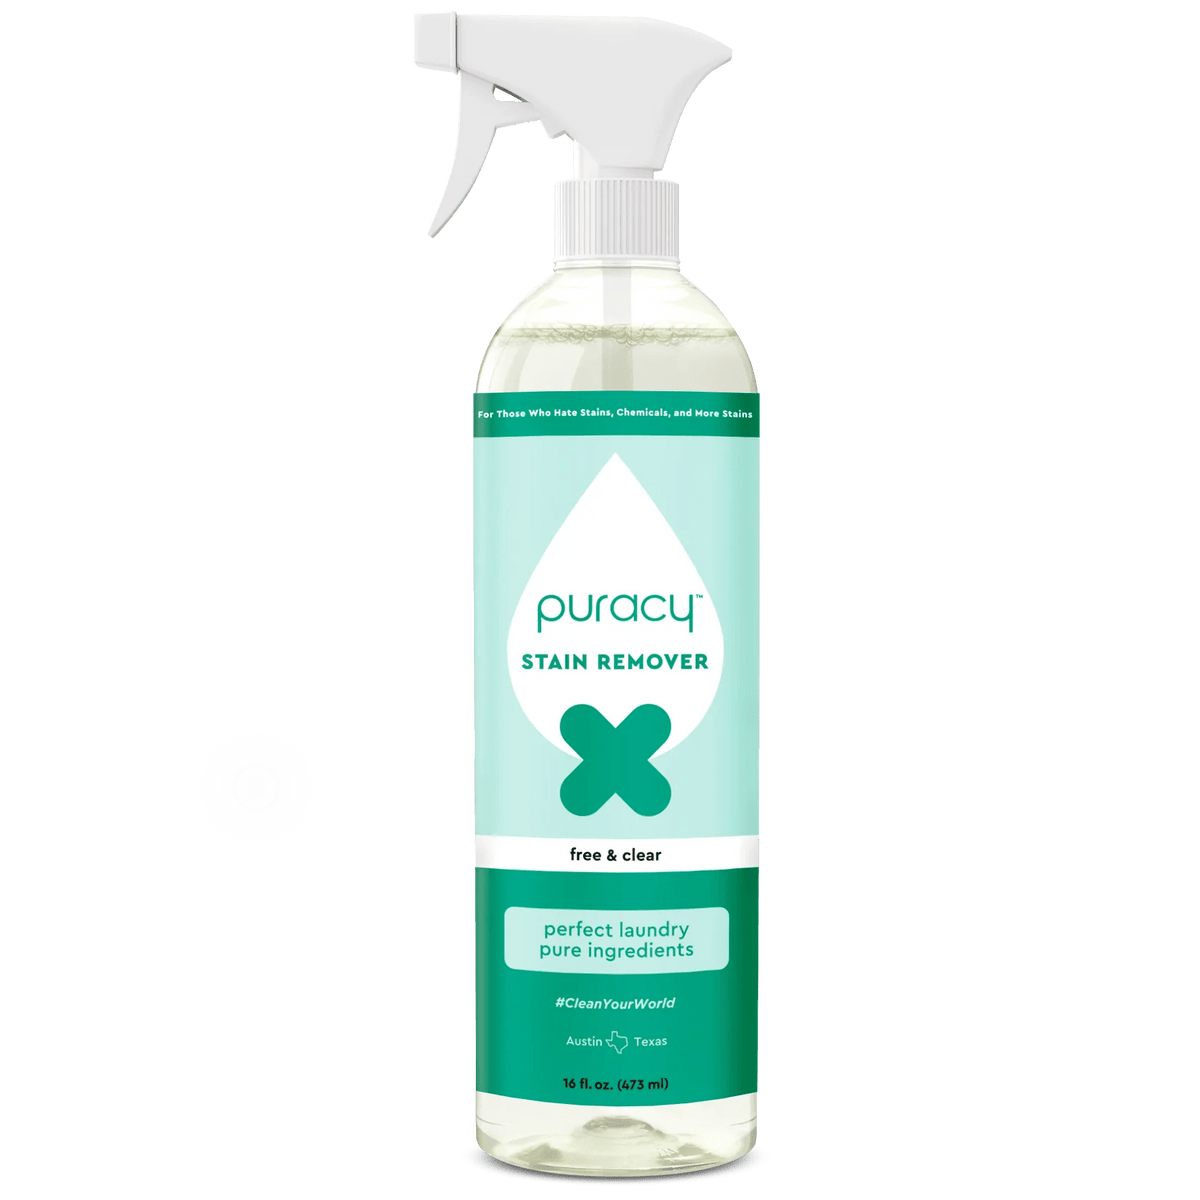 Natural Laundry Stain Remover on amazon